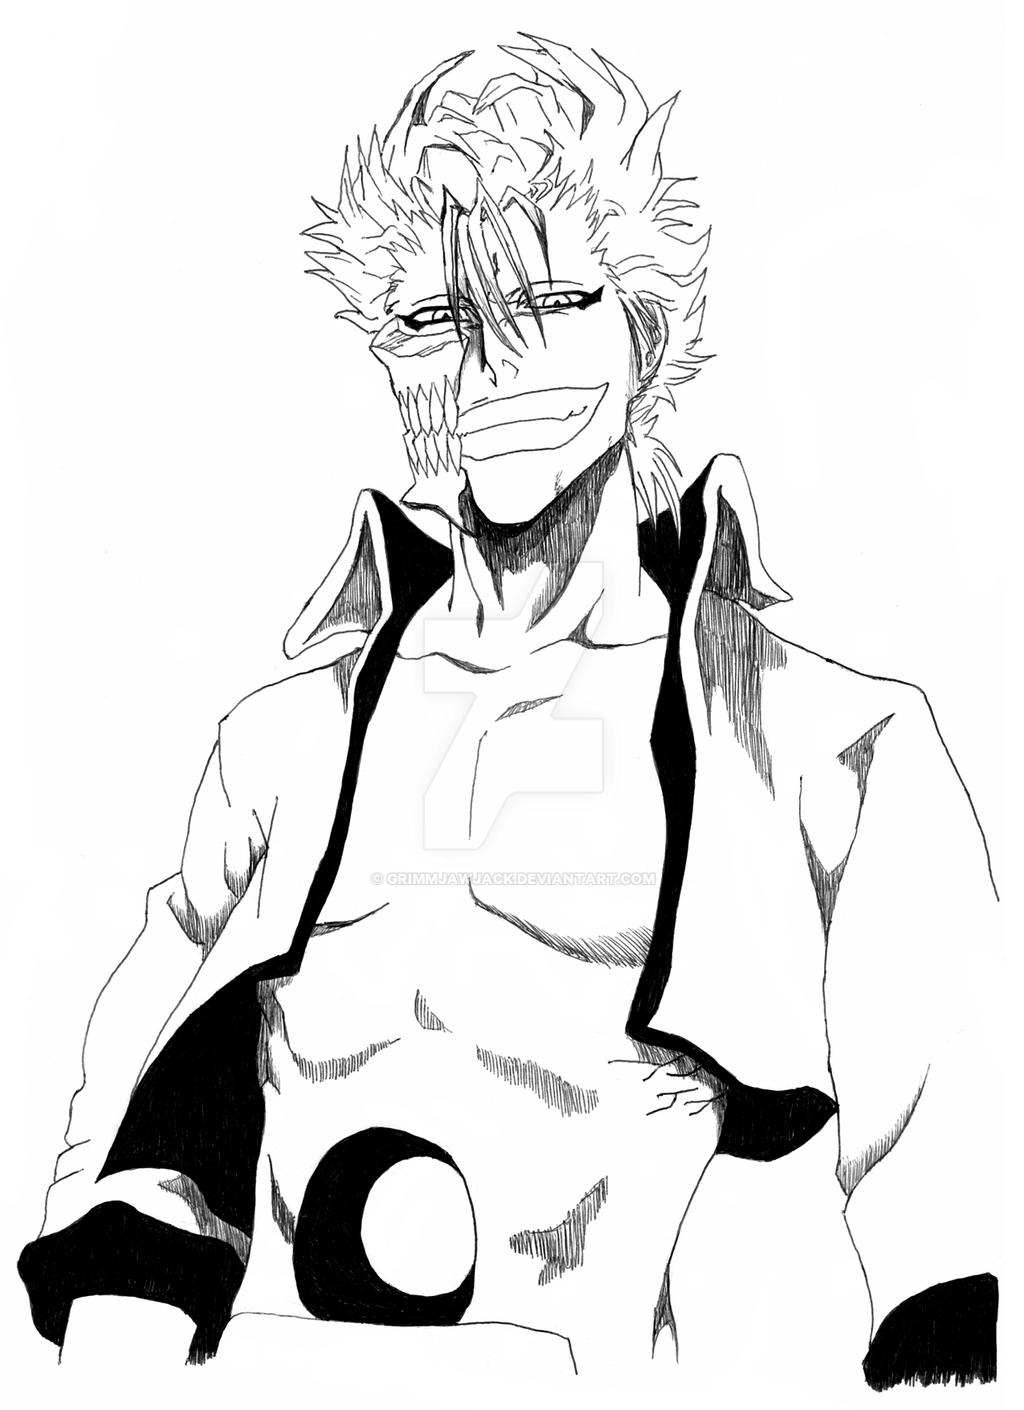 Grimmjow - Addicted To Blood By Grimmjawjack On Deviantart E2D.